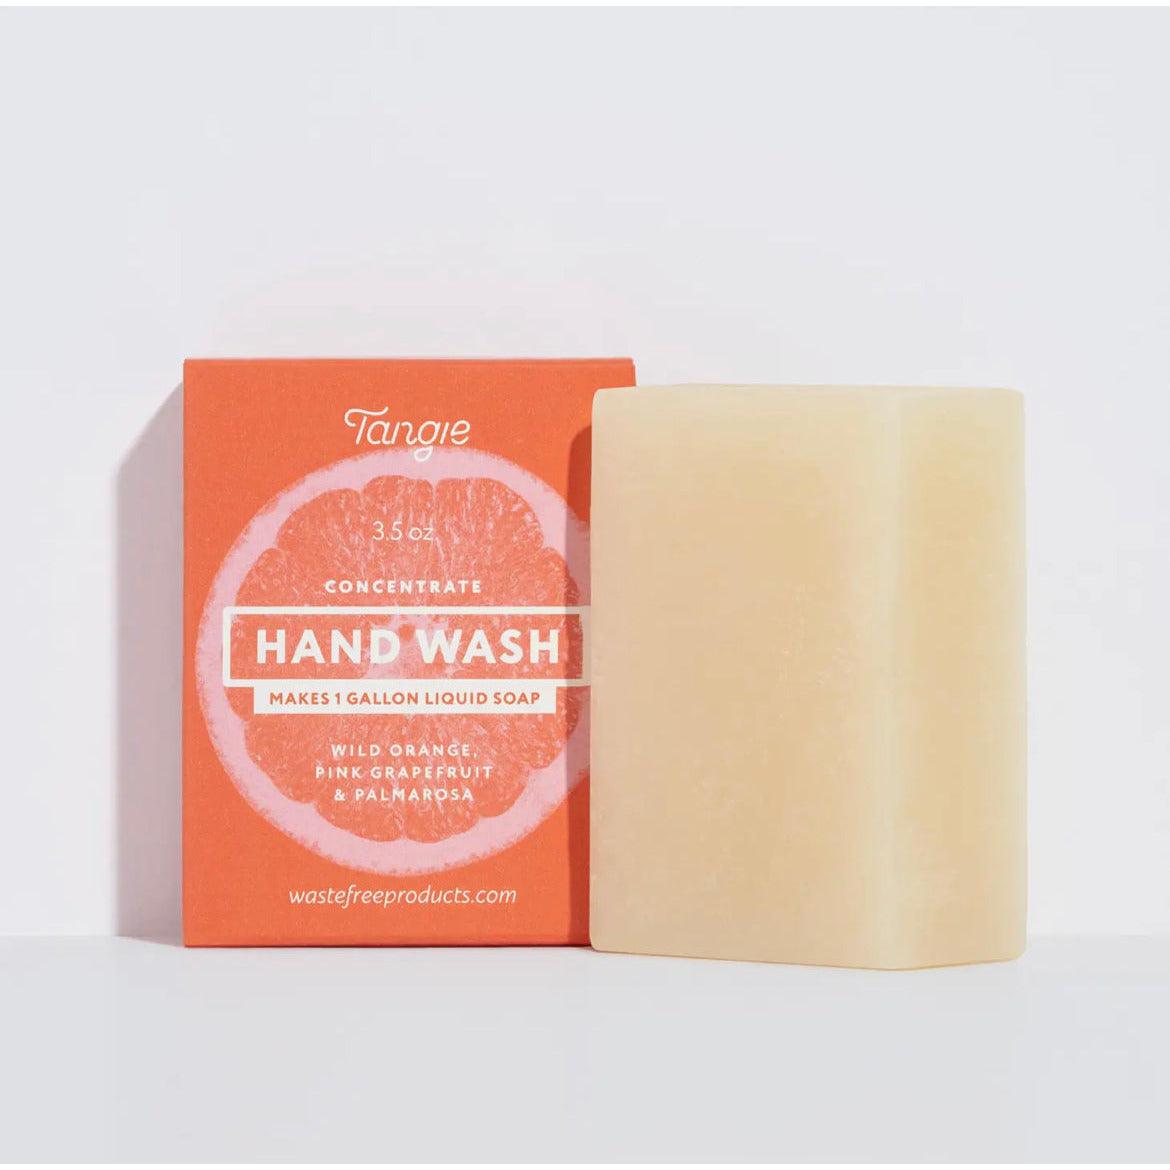 Foaming Hand Soap Concentrate by Tangie - Ninth & Pine